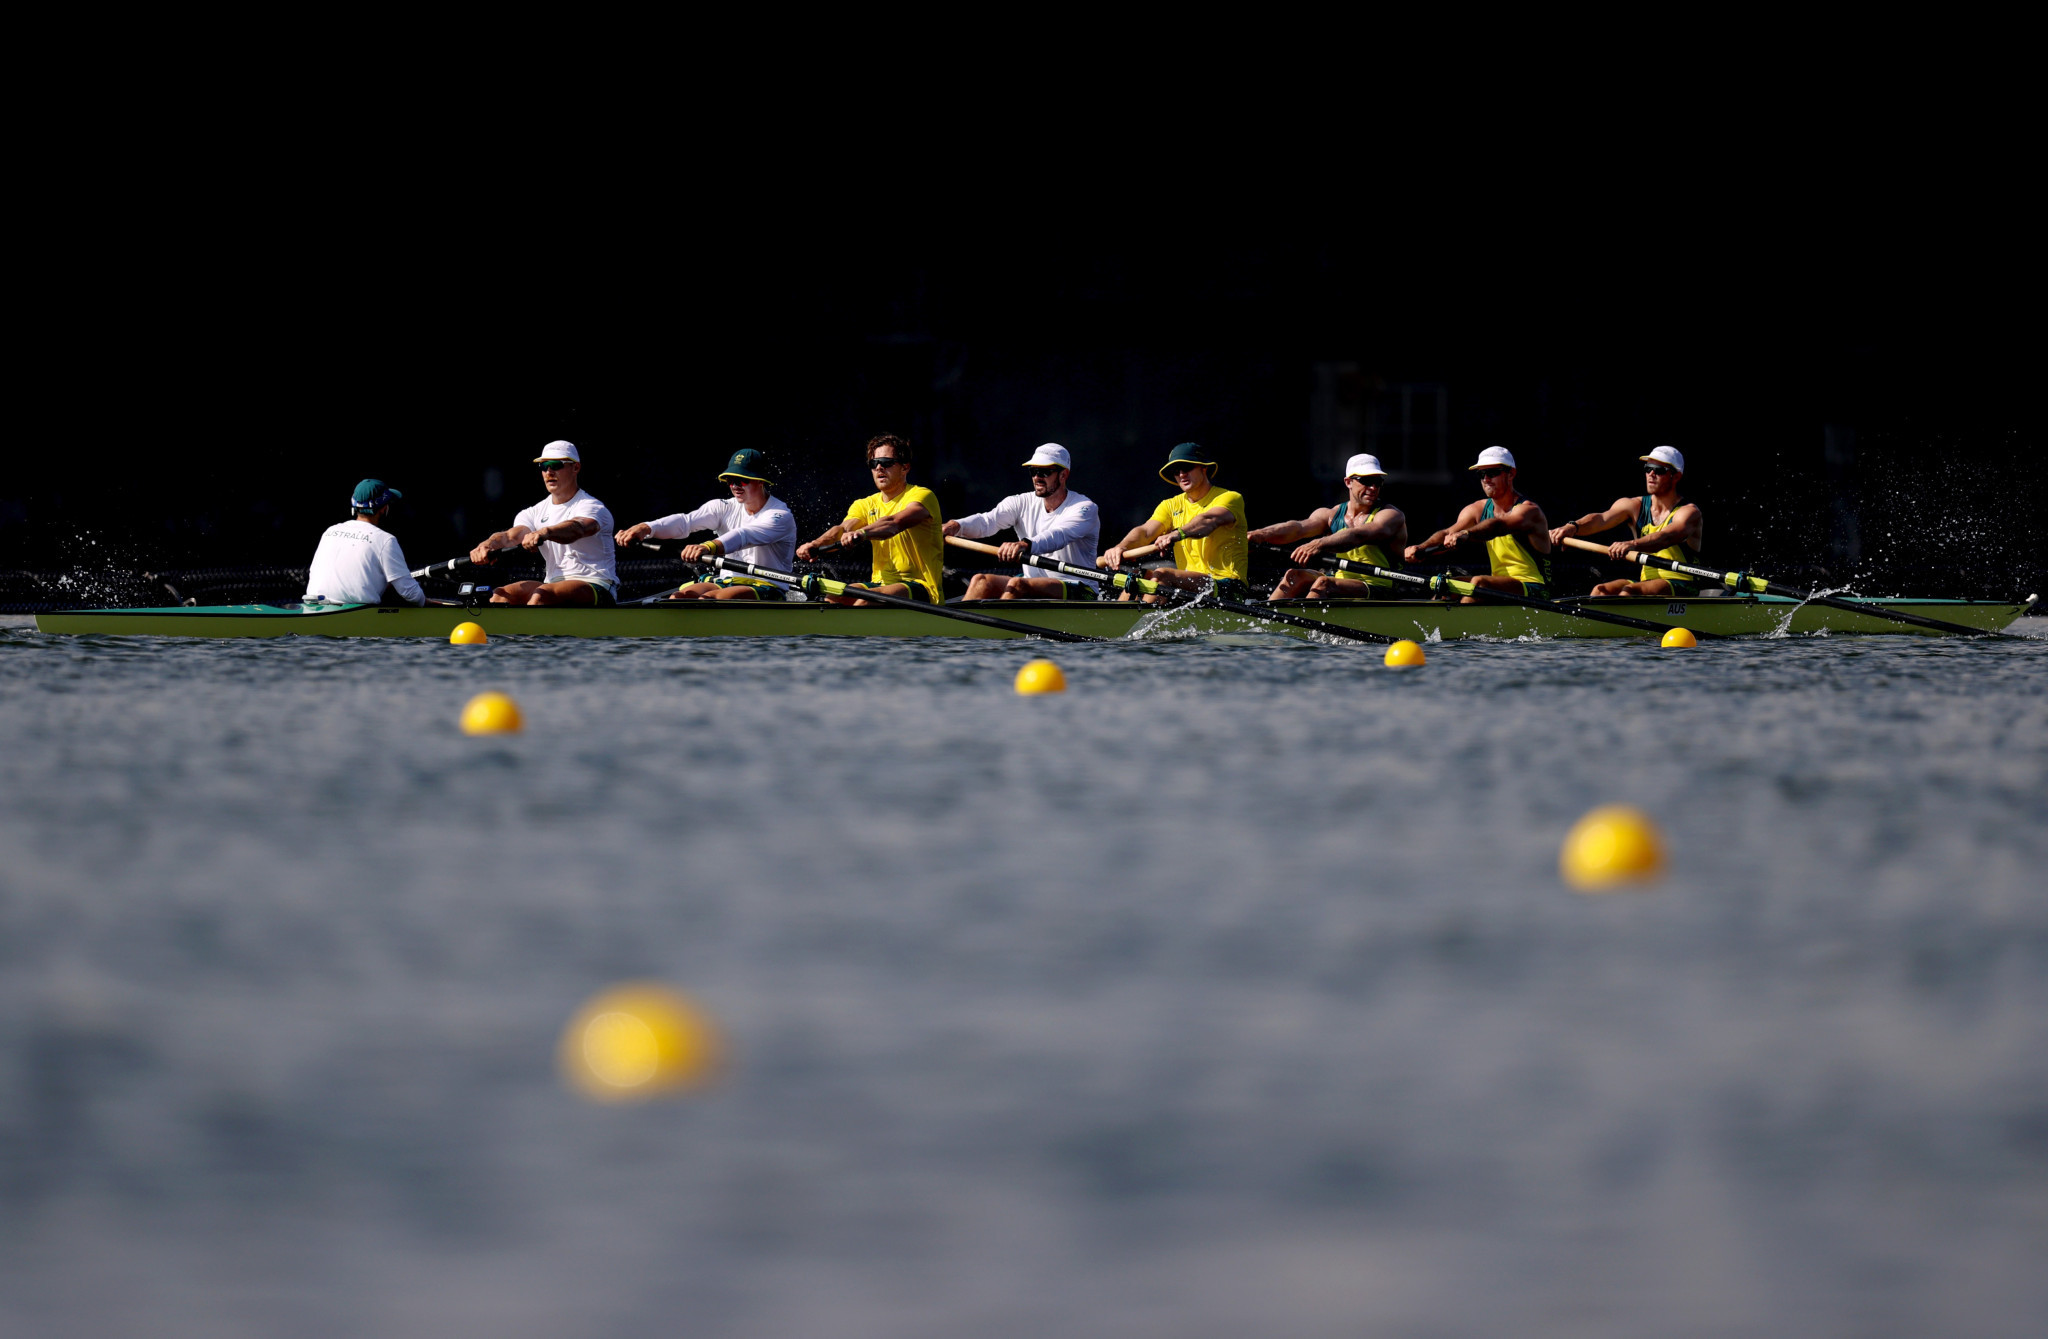 Careful cost control allows World Rowing to emerge from nearly regatta-less 2020 racing season with a surplus